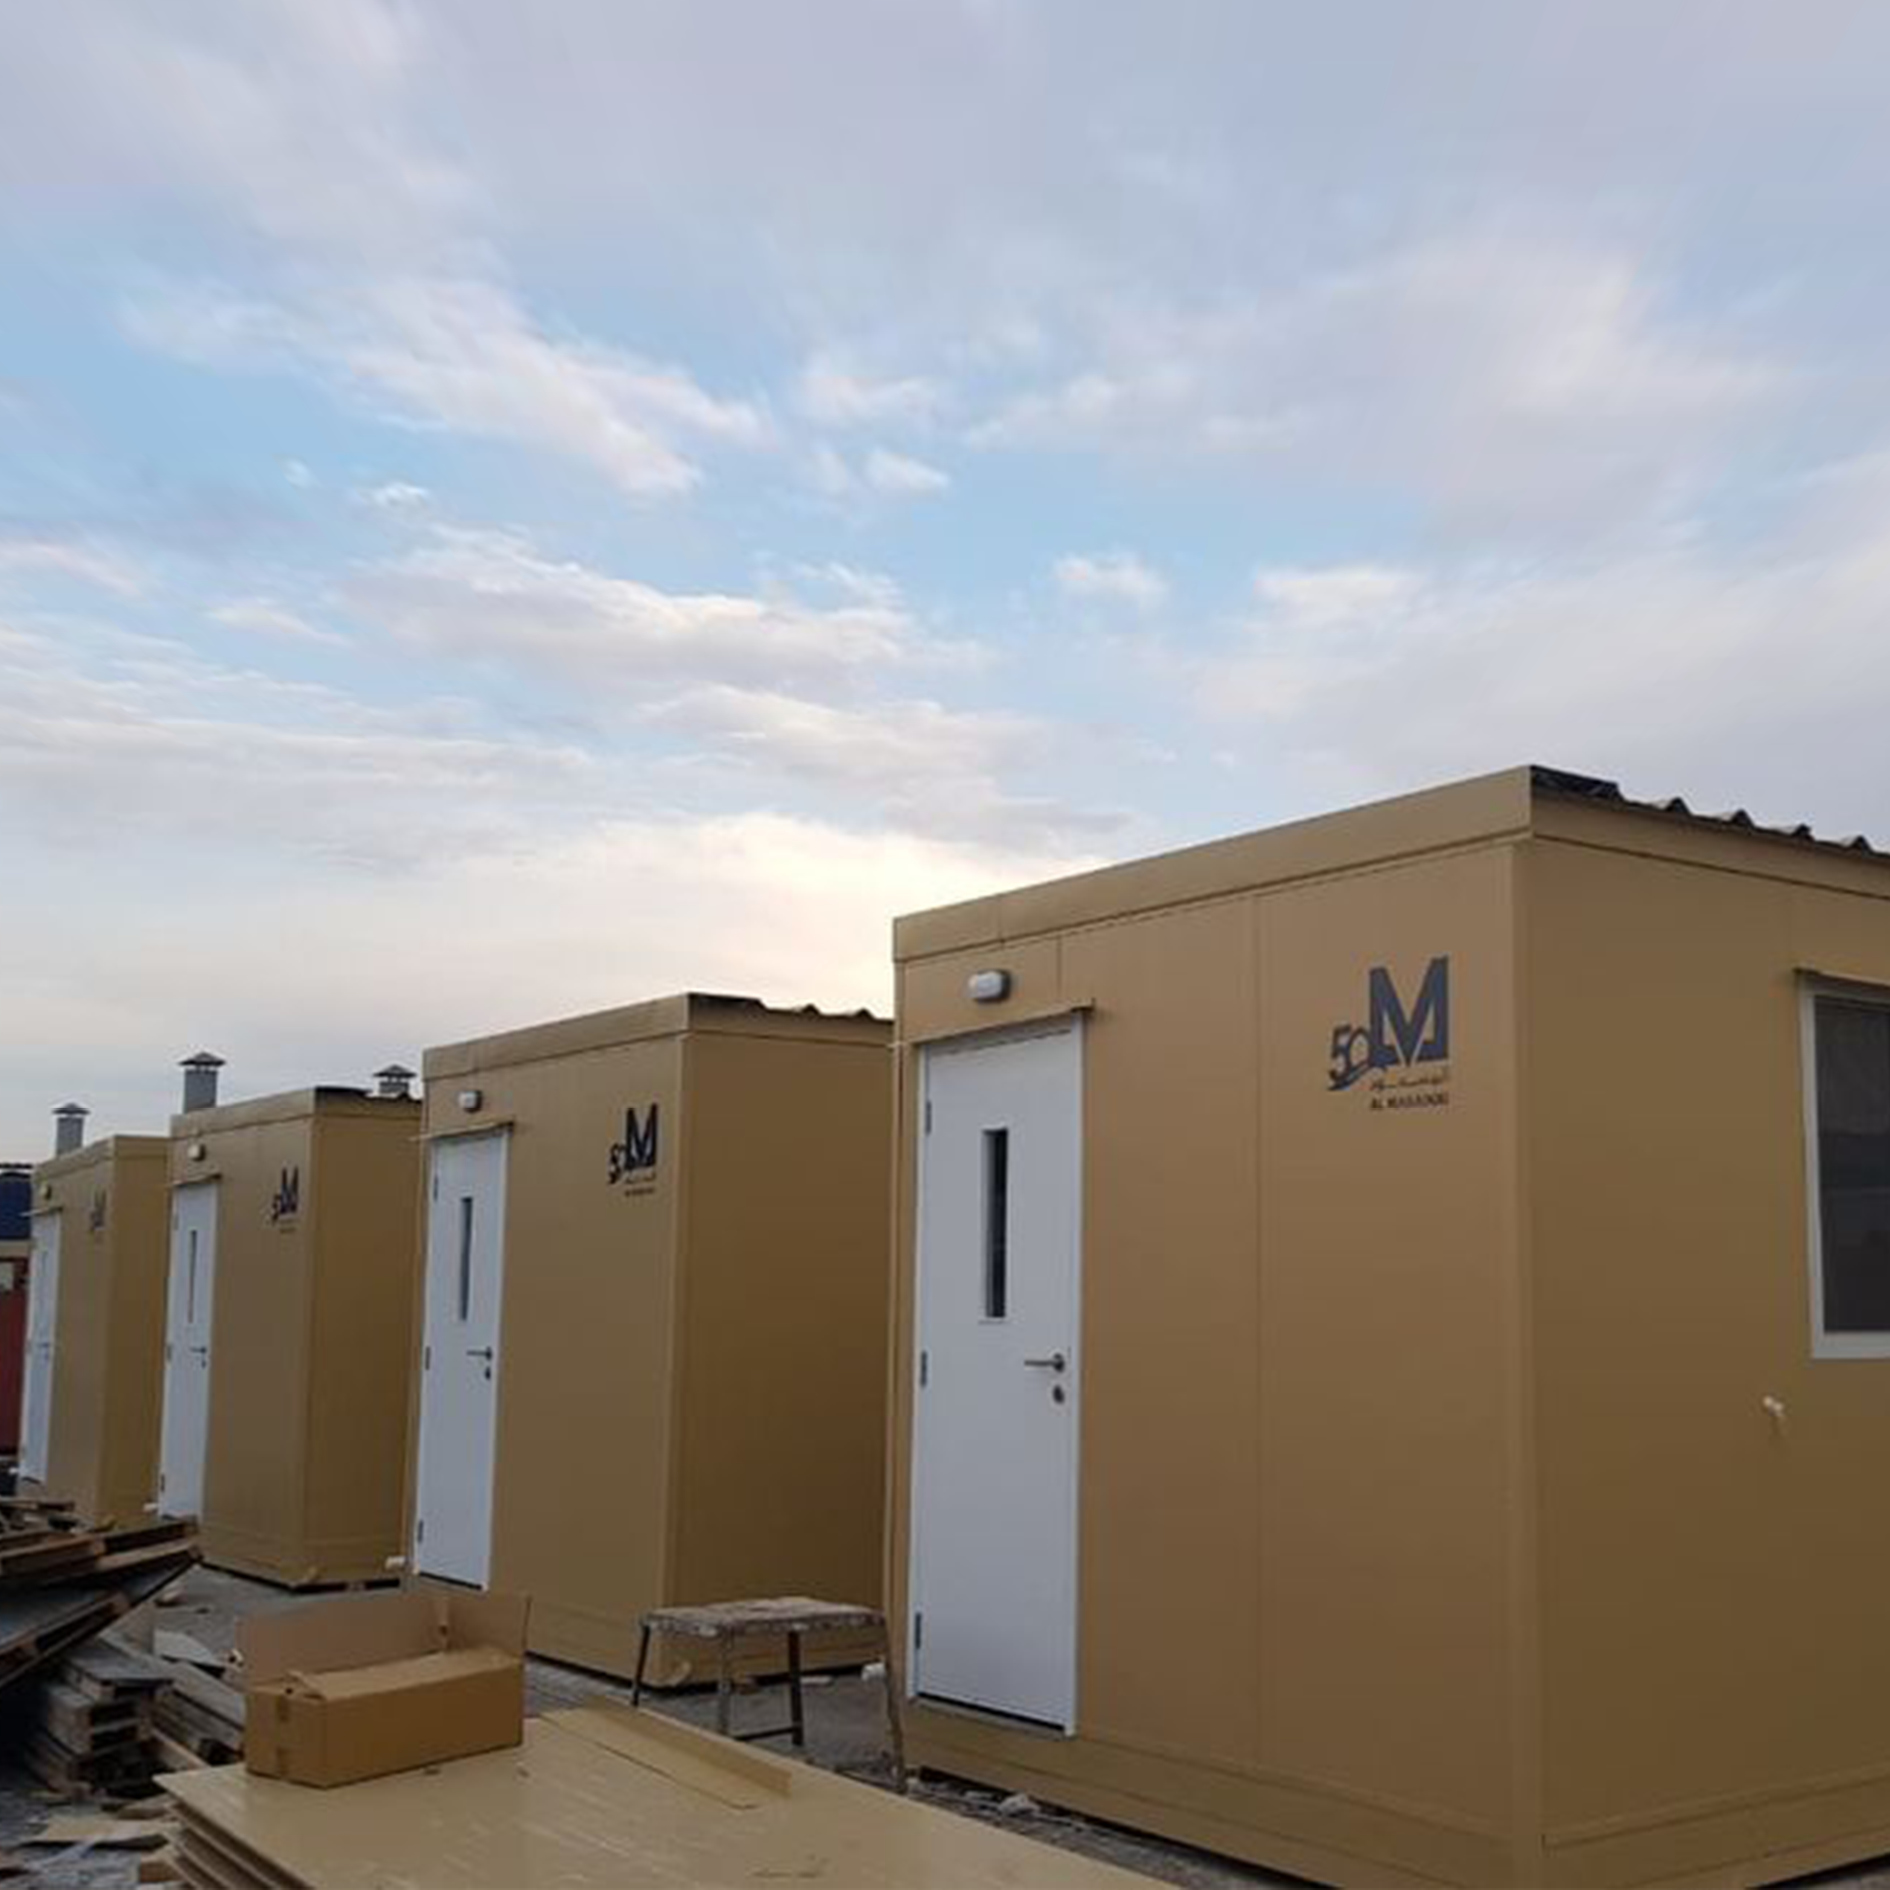 Al Masaood Bergum successfully builds specialized accommodation facility in shortest time possible